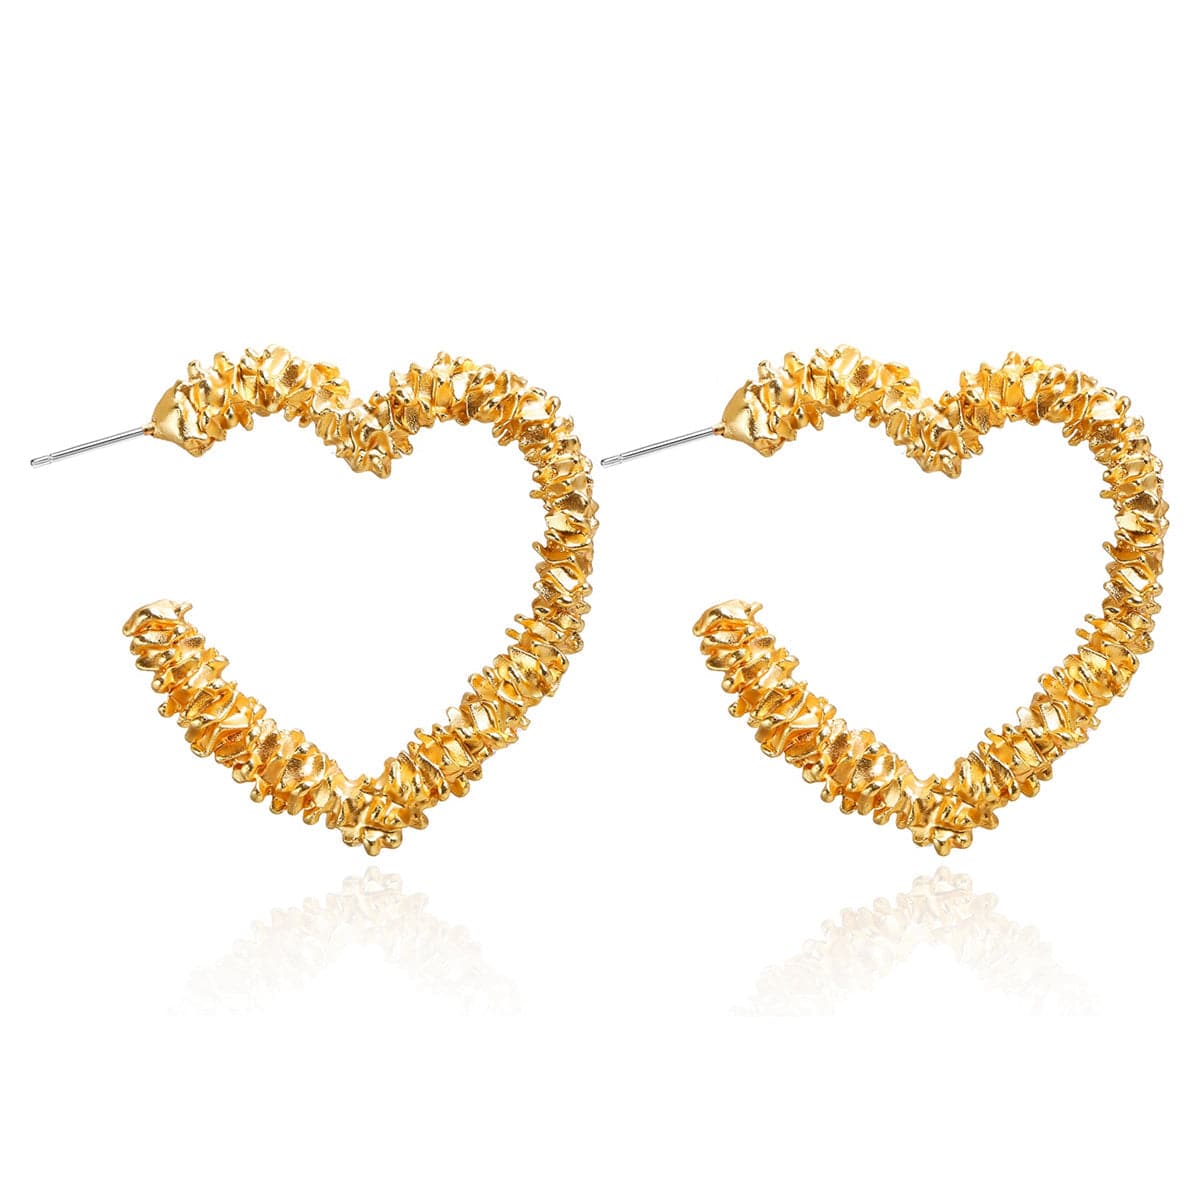 18K Gold-Plated Twisted Heart Hoop Earring